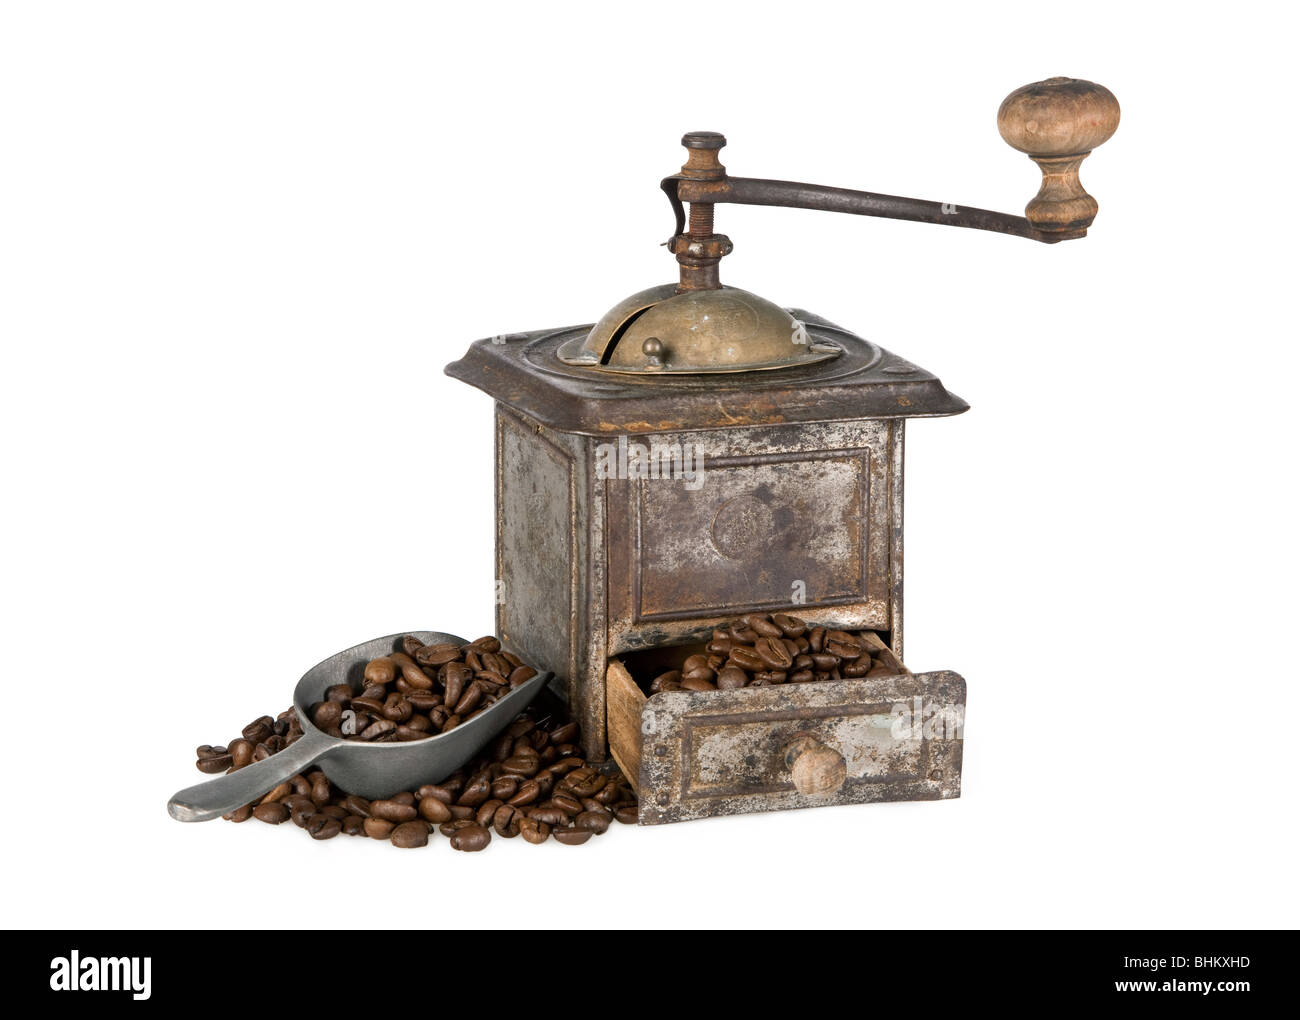 https://c8.alamy.com/comp/BHKXHD/antique-coffee-grinder-filled-with-coffee-beans-isolated-on-white-BHKXHD.jpg